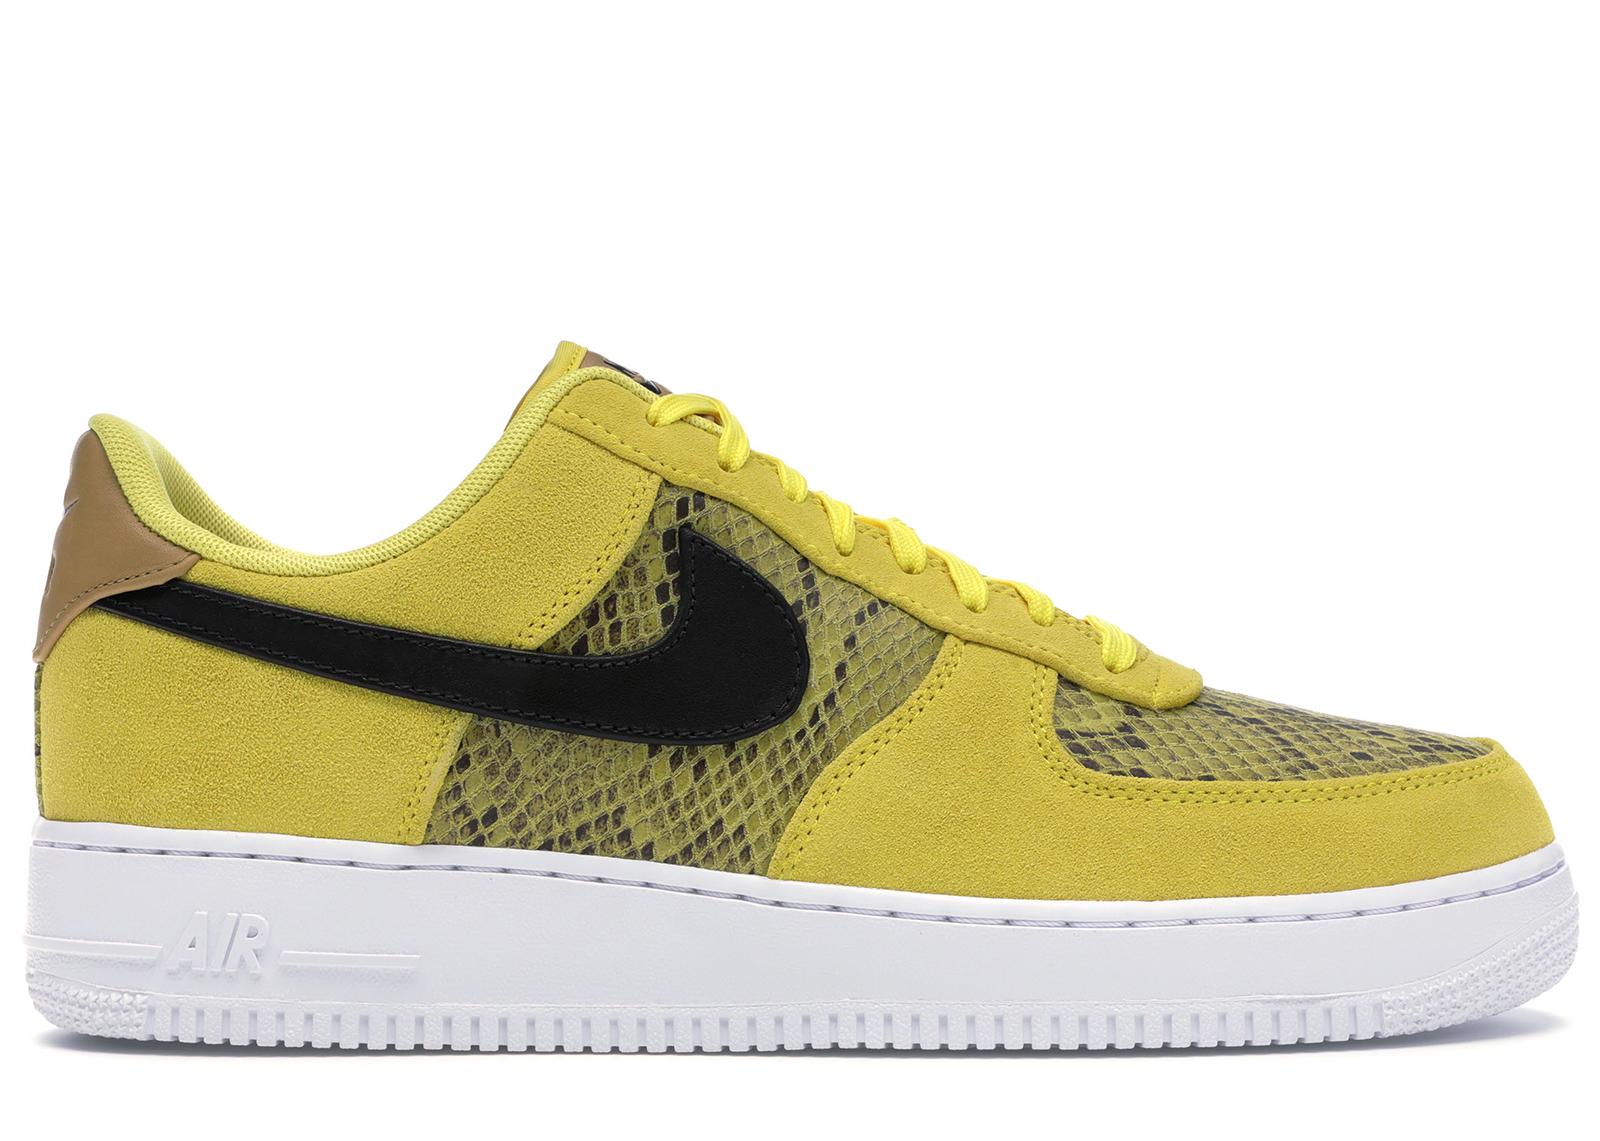 yellow snakeskin shoes